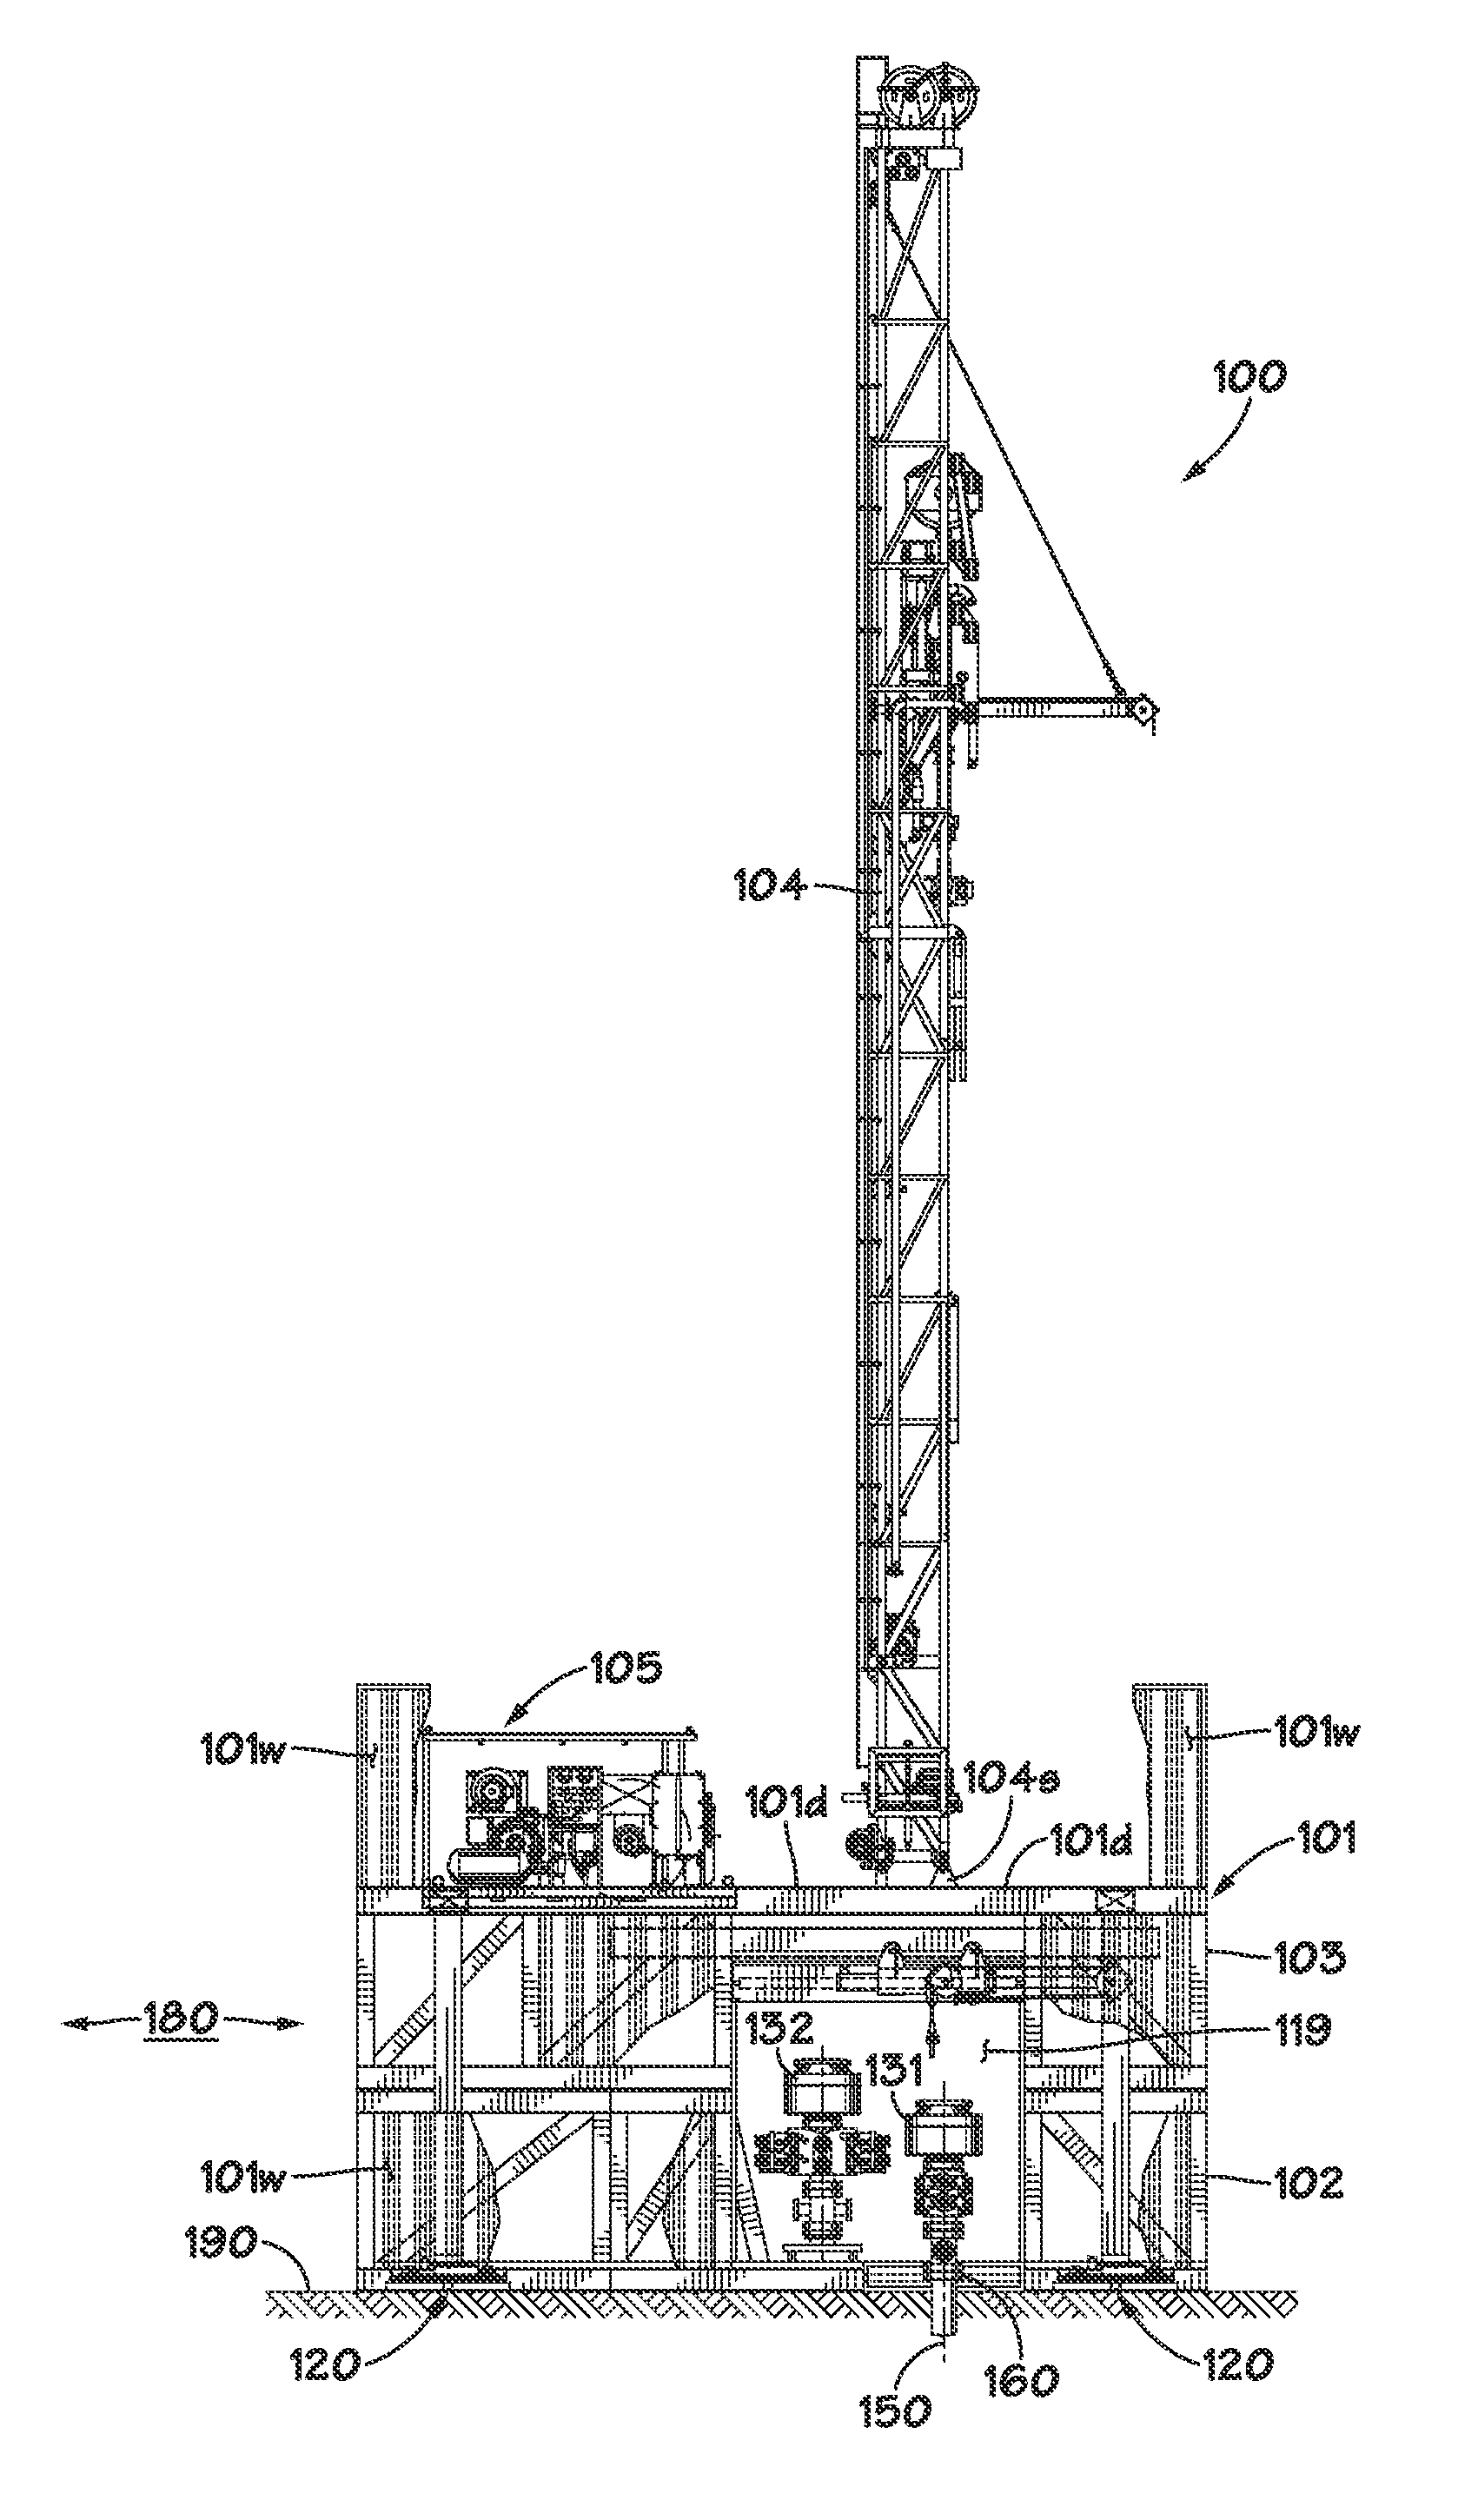 Performing simultaneous operations on multiple wellbore locations using a single mobile drilling rig